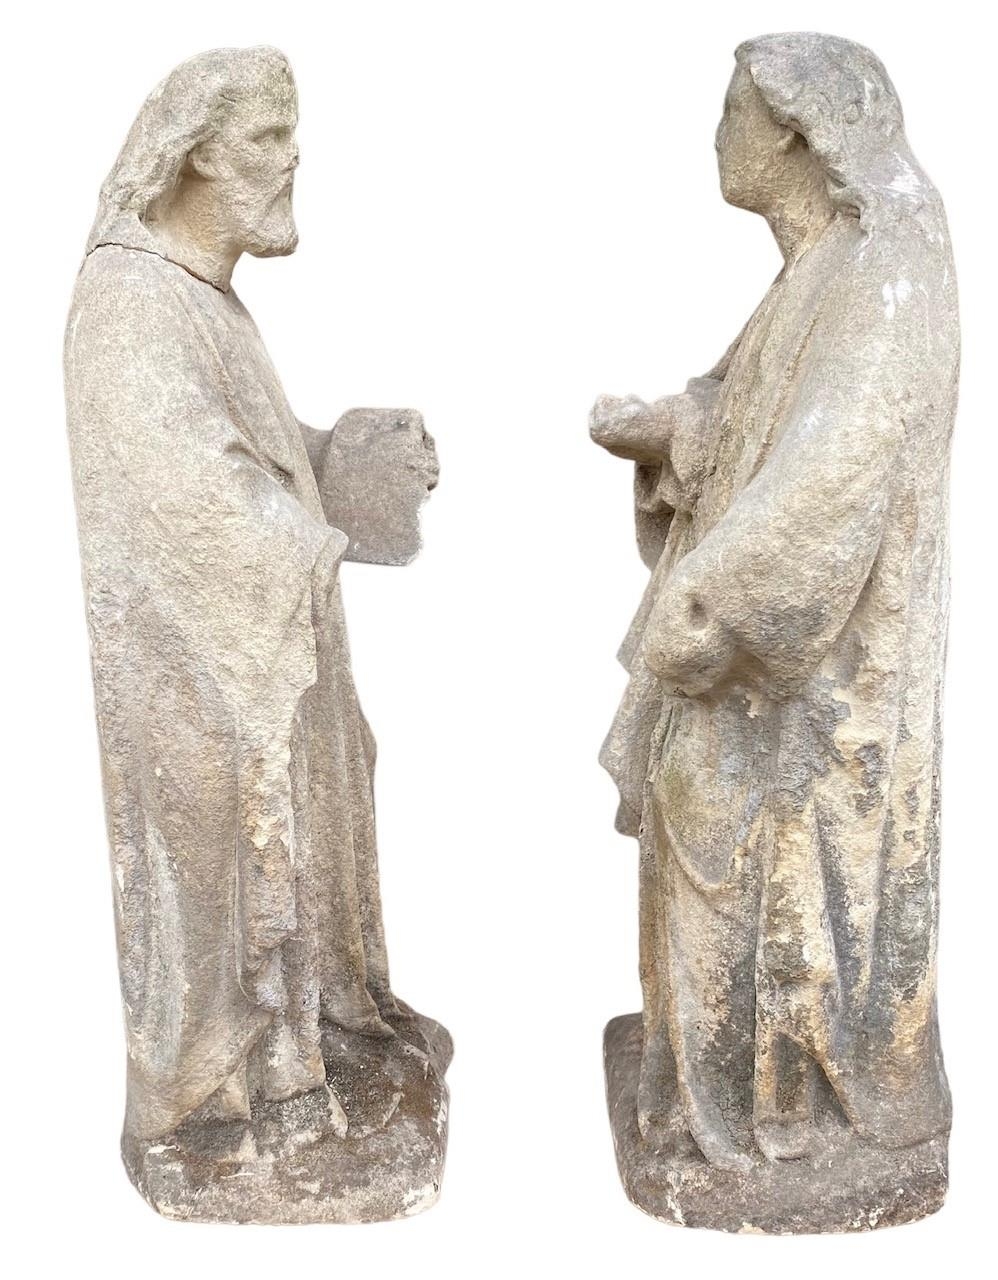 A PAIR OF 18TH CENTURY CARVED LIMESTONE FIGURES OF JOSEPH AND MARY. (h 71cm) - Image 2 of 4